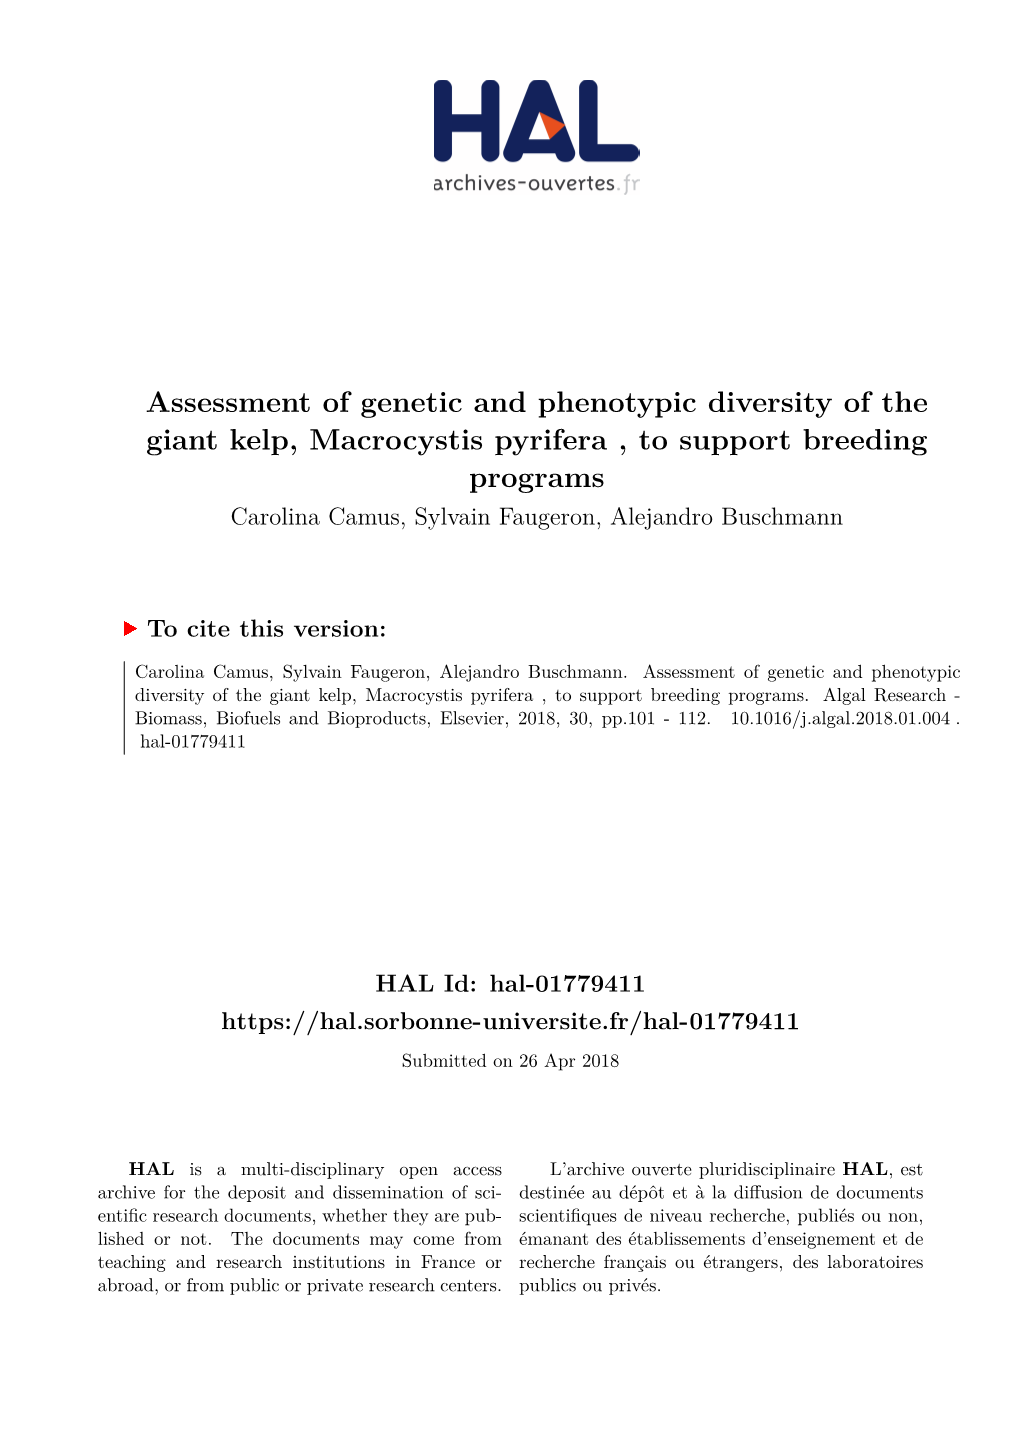 Assessment of Genetic and Phenotypic Diversity of the Giant Kelp, Macrocystis Pyrifera , to Support Breeding Programs